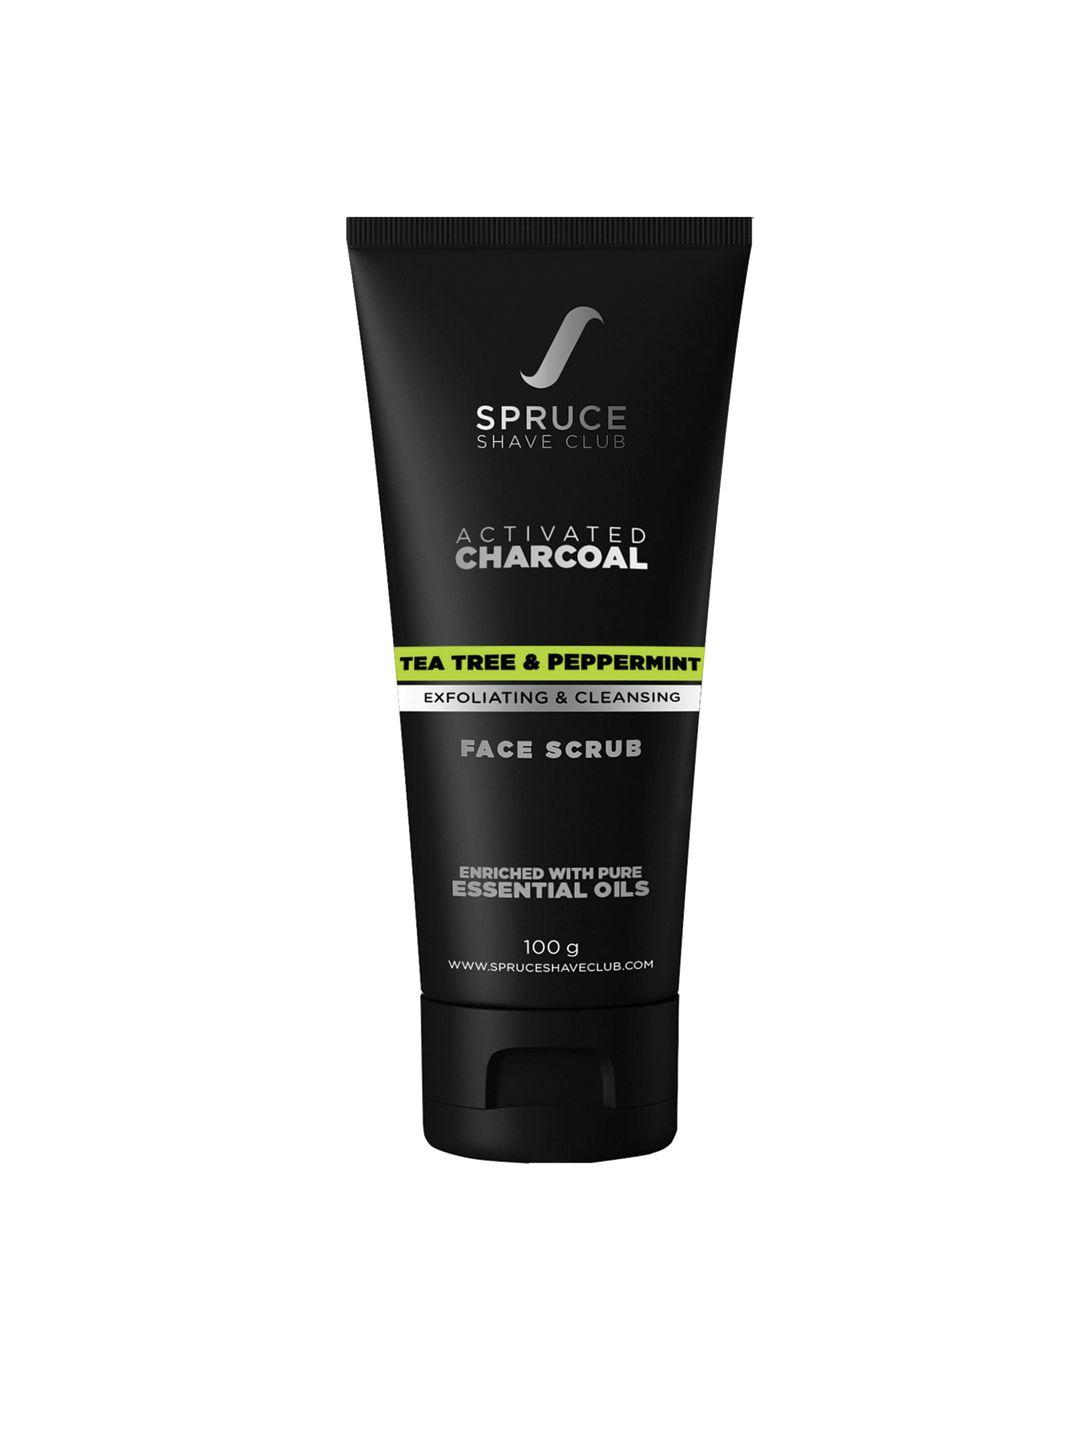 spruce shave club men black charcoal face scrub with tea tree & peppermint 100g